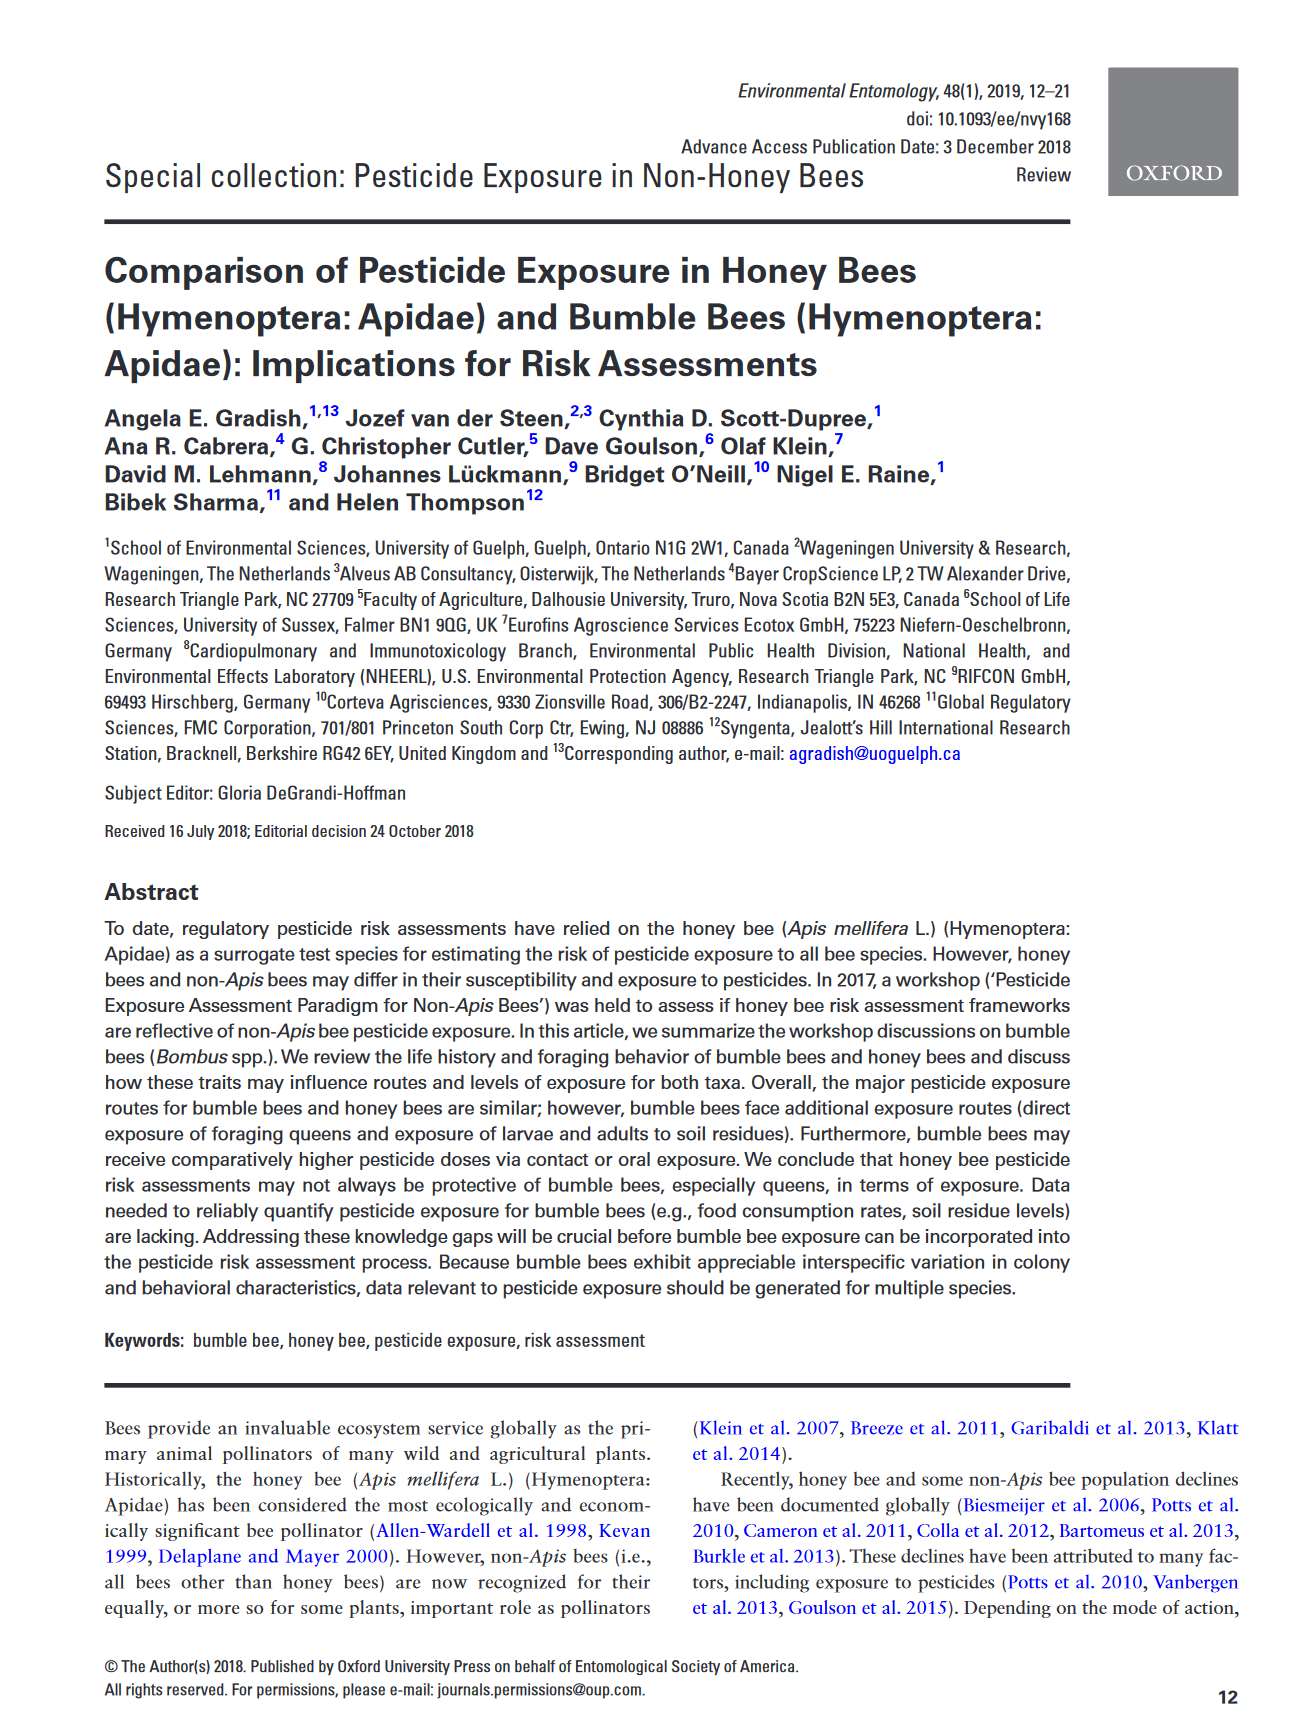 Comparison-of-exposure-in-honey-bees-and-bumble-bees